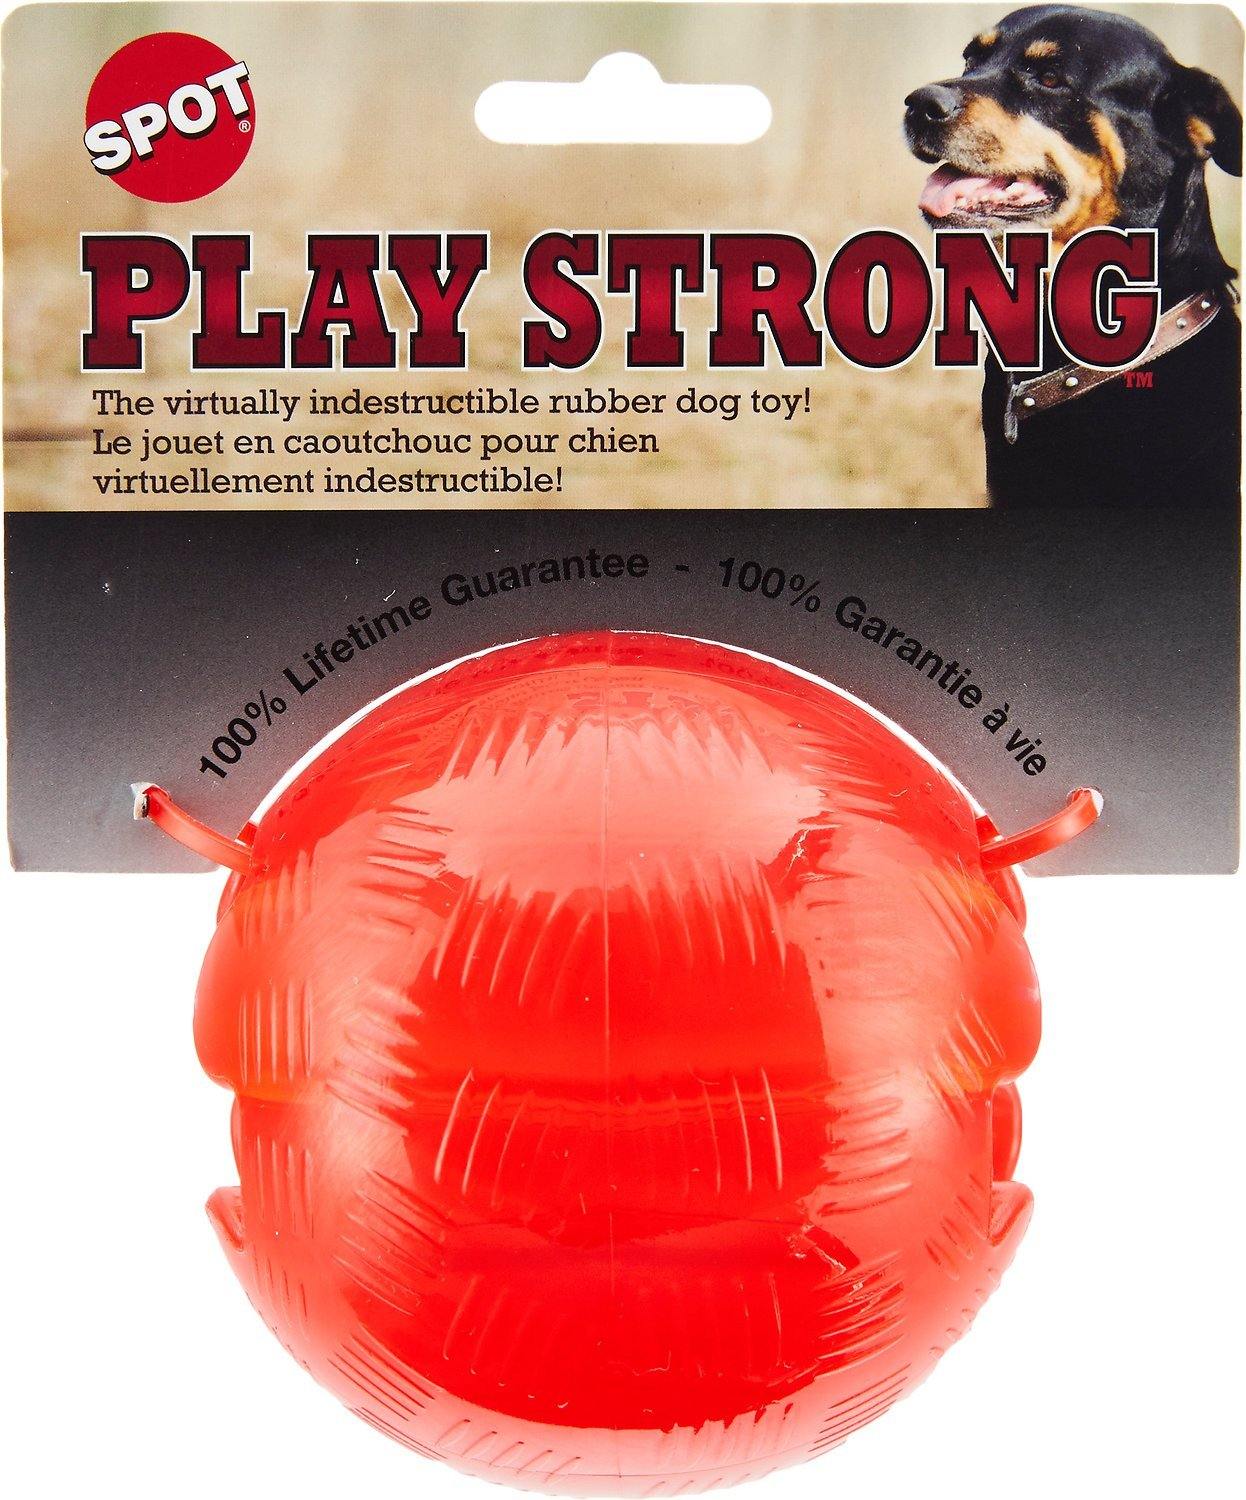 Canine's World Dog Ball Toys Spot Play Strong Rubber Ball Dog Toy - Red Spot